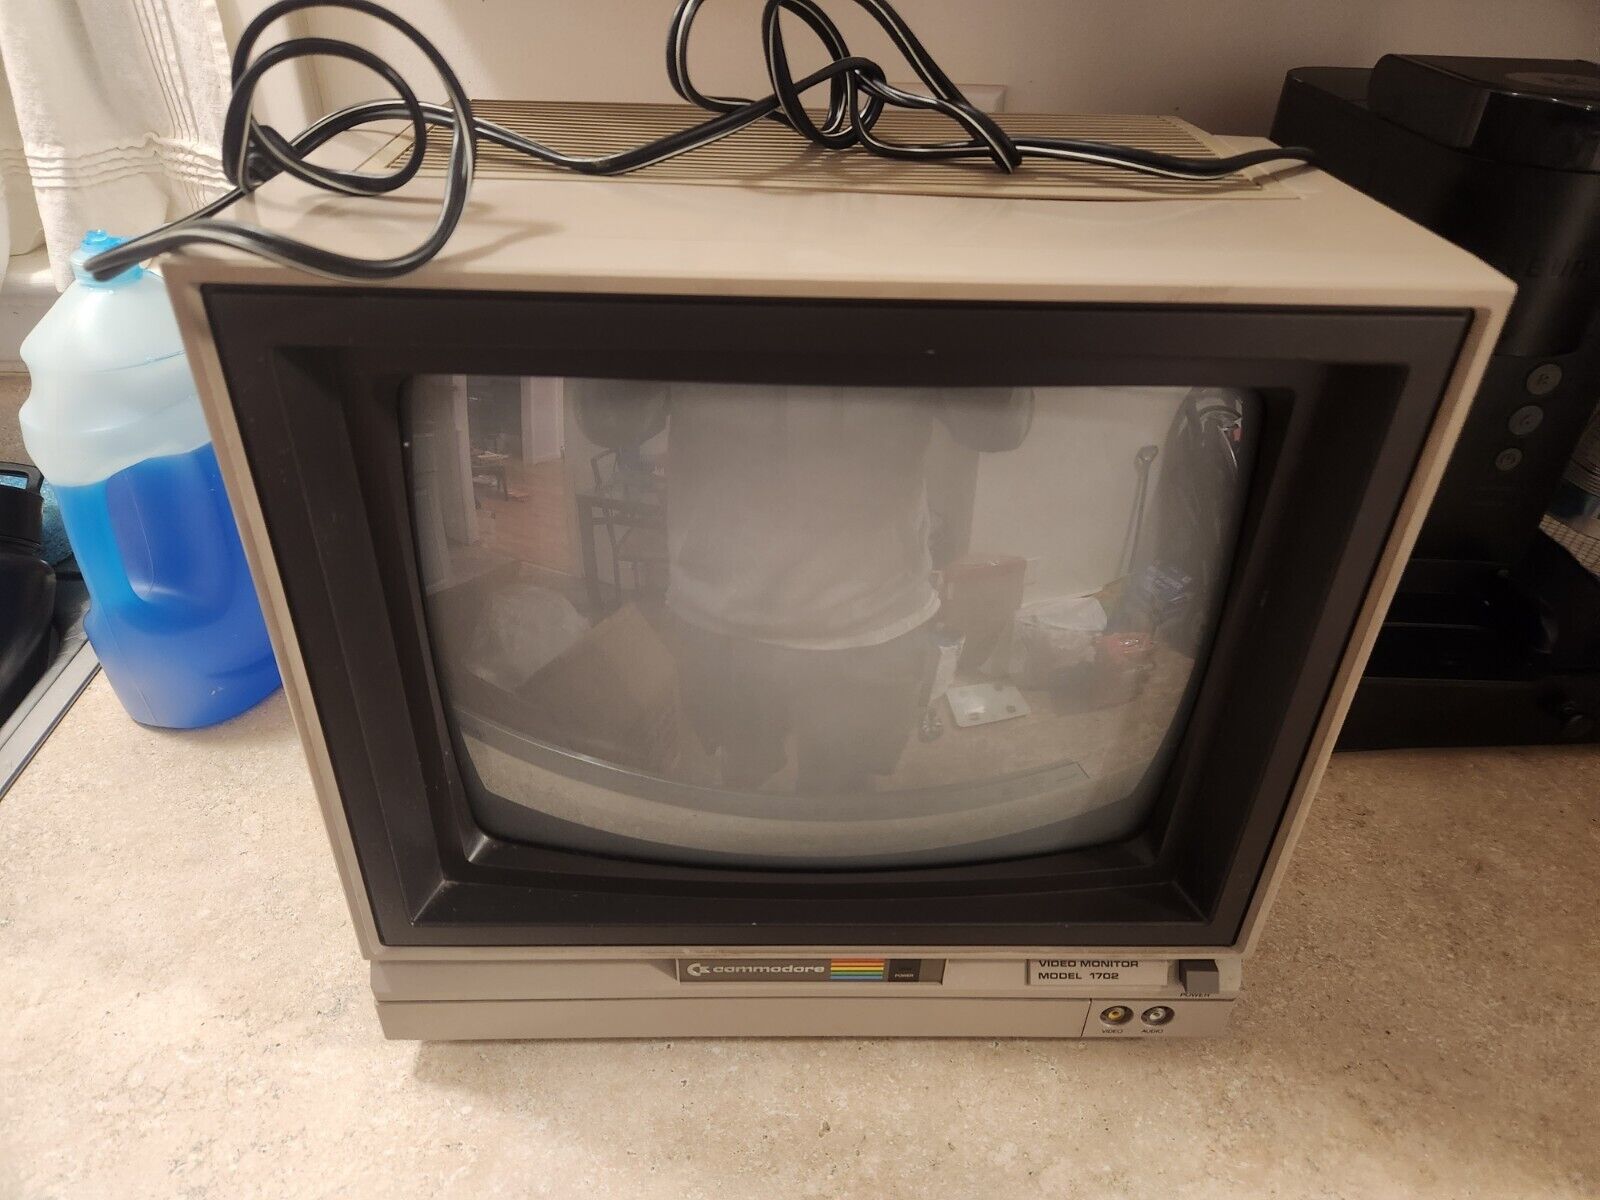 1984 Commodore 1702  CRT Monitor For Gaming - Tested & Working With Box